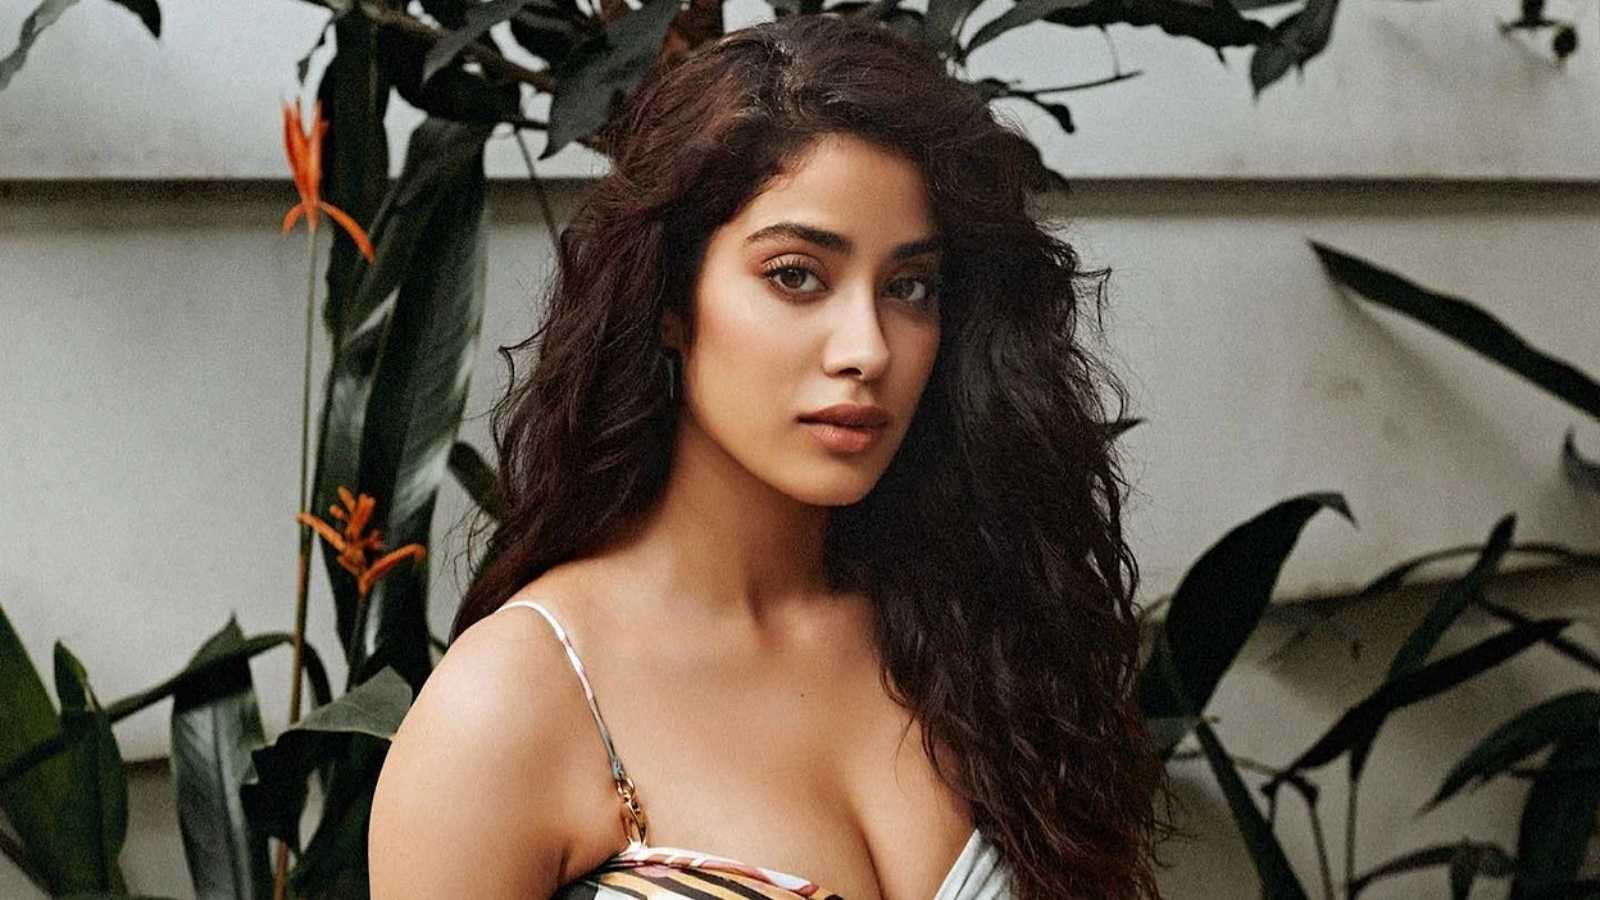 Janhvi Kapoor against remake of Sridevi's iconic 'Chaal Baaz' led by Shraddha Kapoor, does she want to star in the film instead?